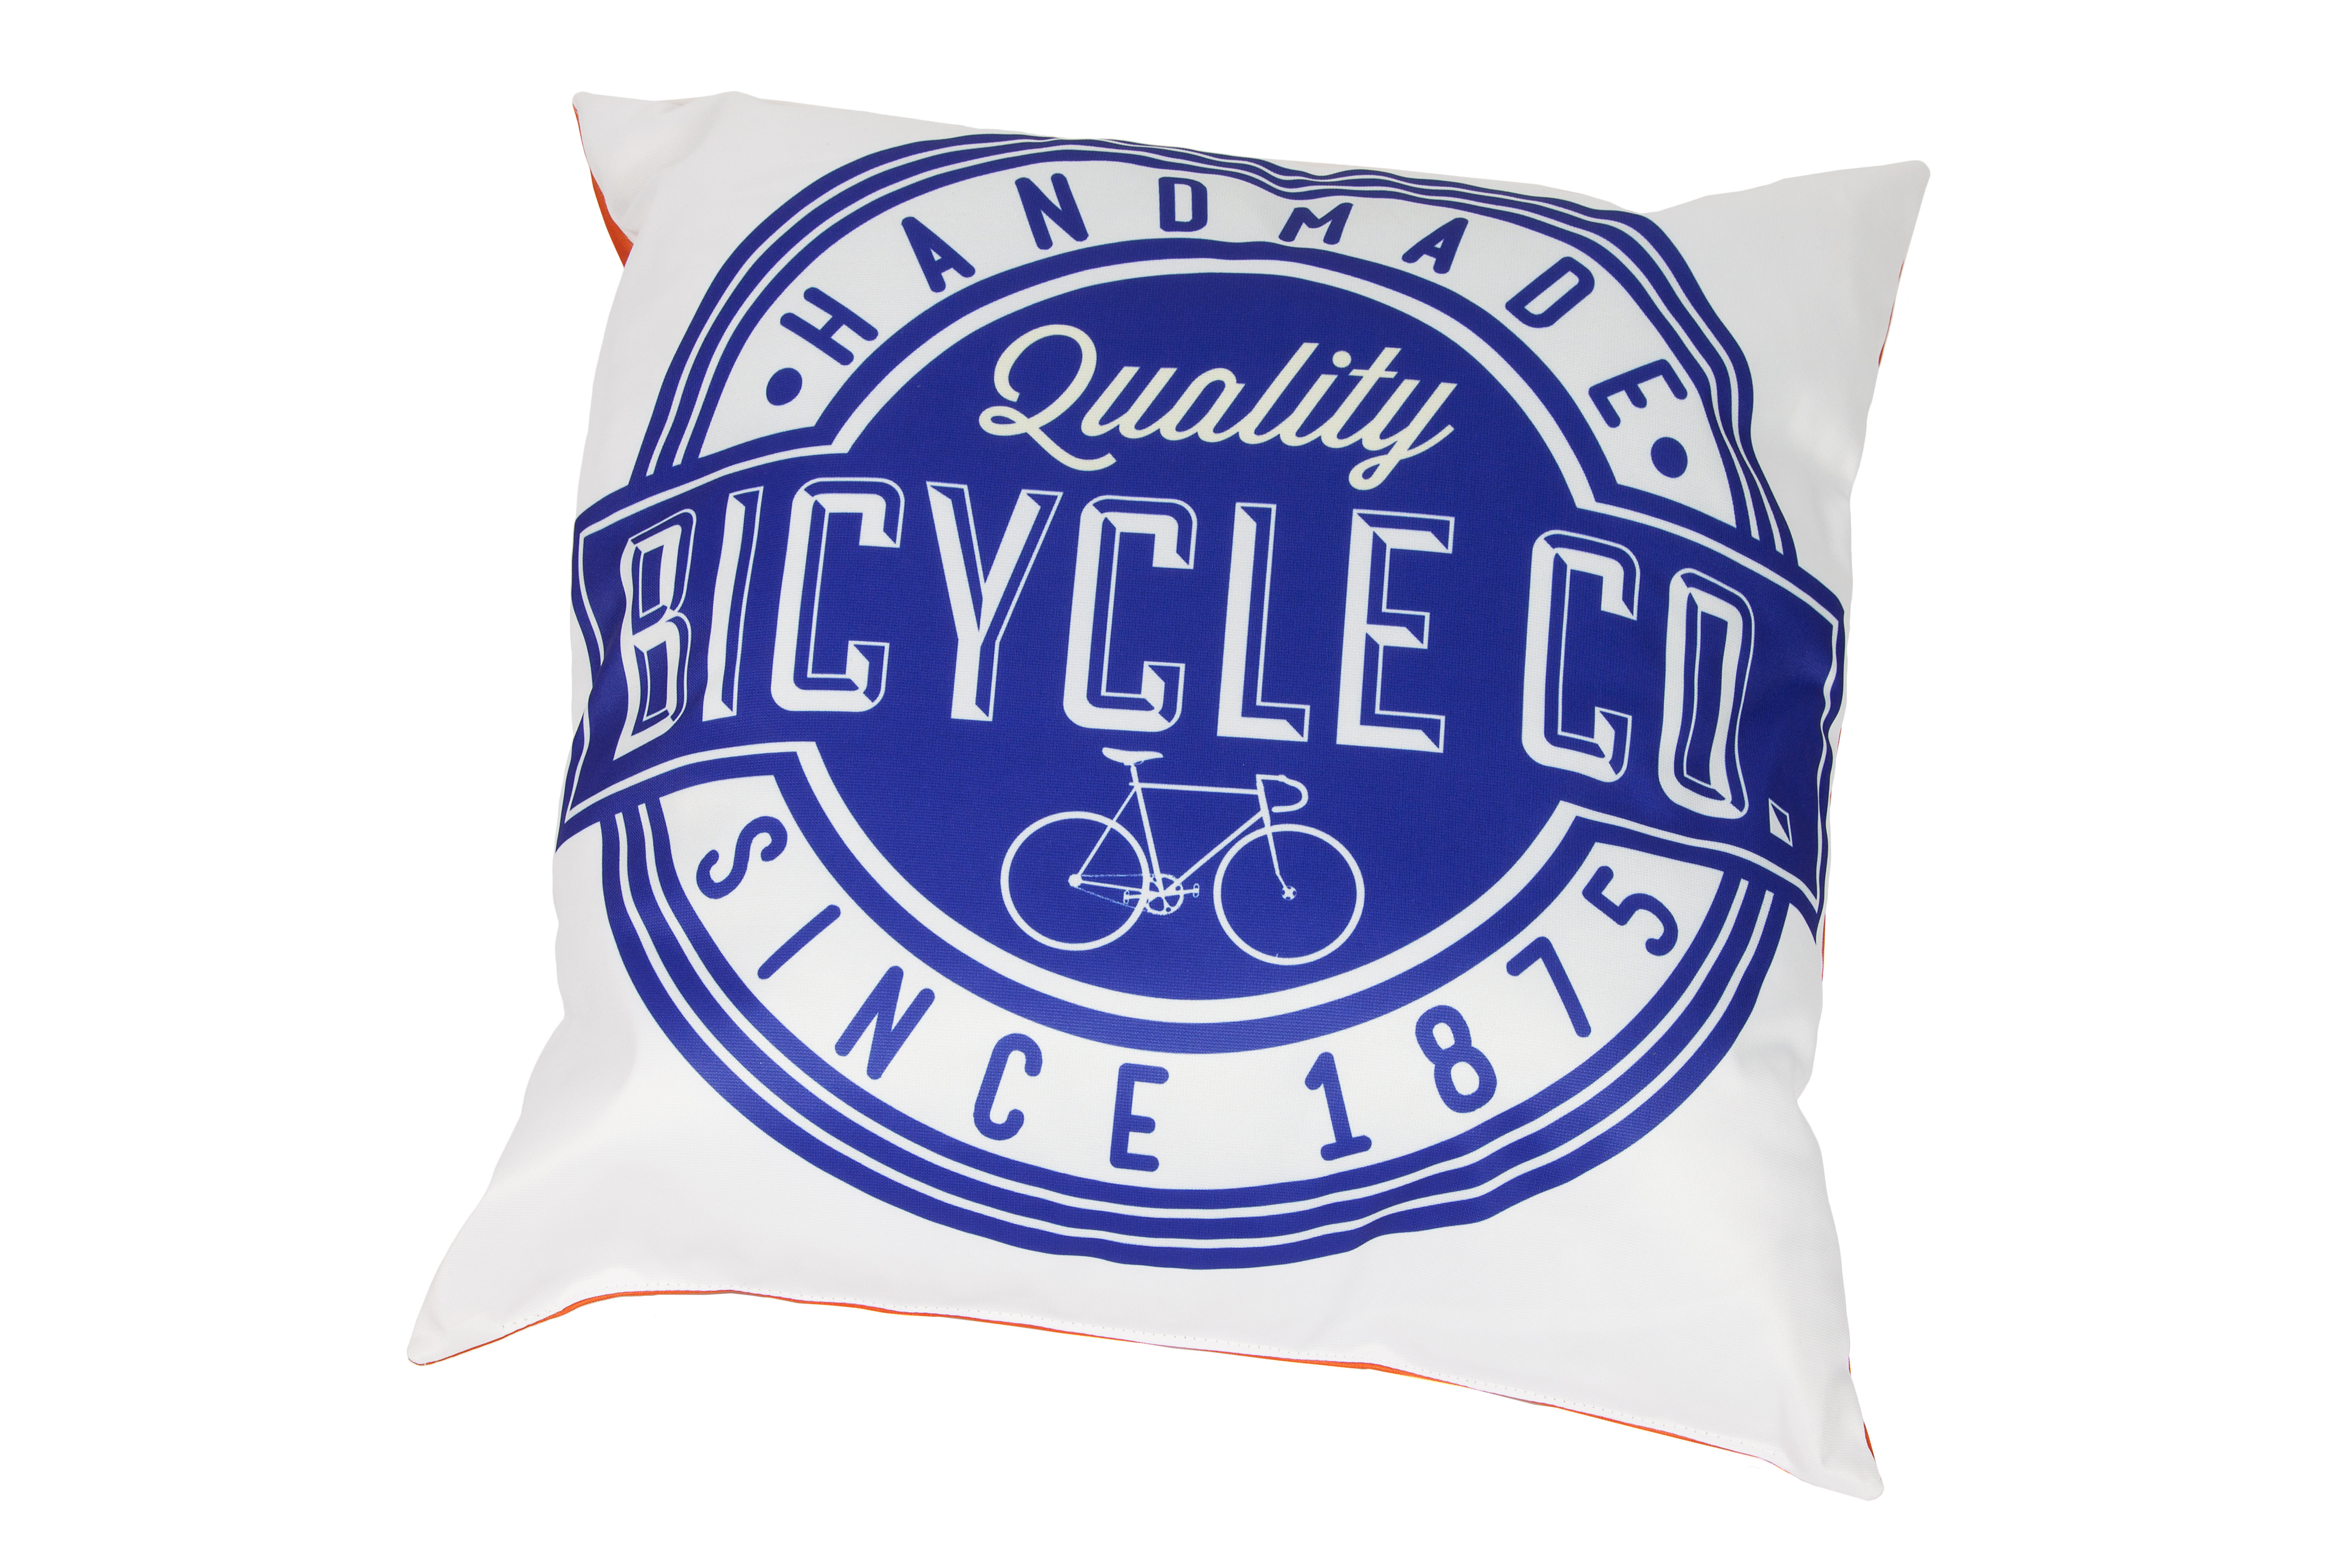 Pillow Full Colour Print  Printing UK, Next Day Delivery - www.ontimeprint.co.uk